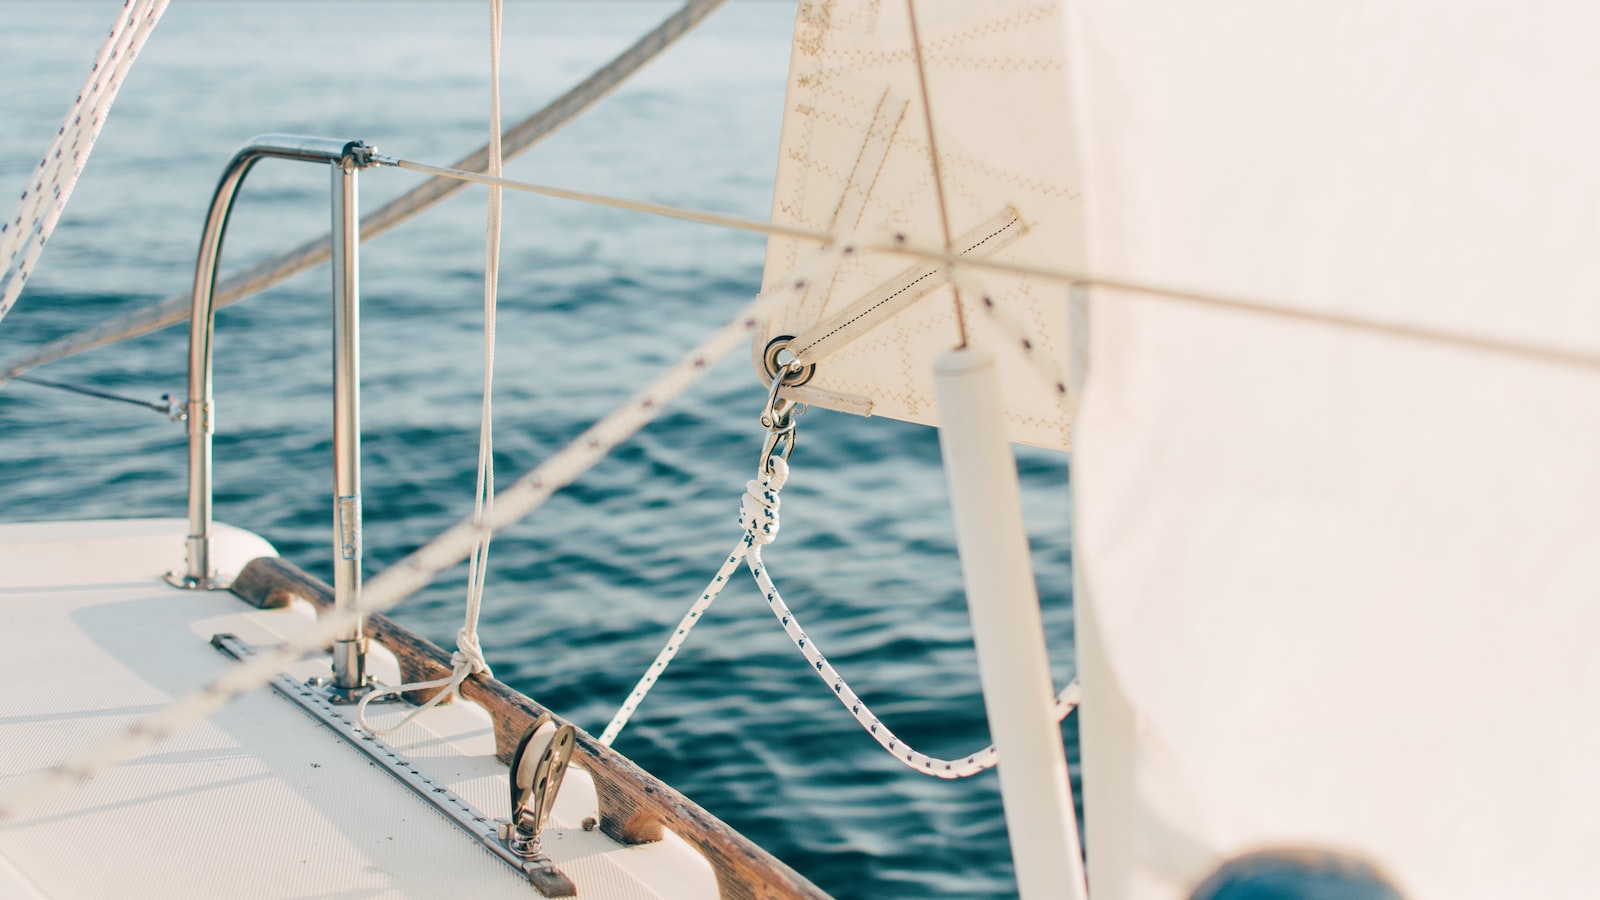 Preparing for the Examination: Tips and Resources for Successfully Passing the Yacht License Test